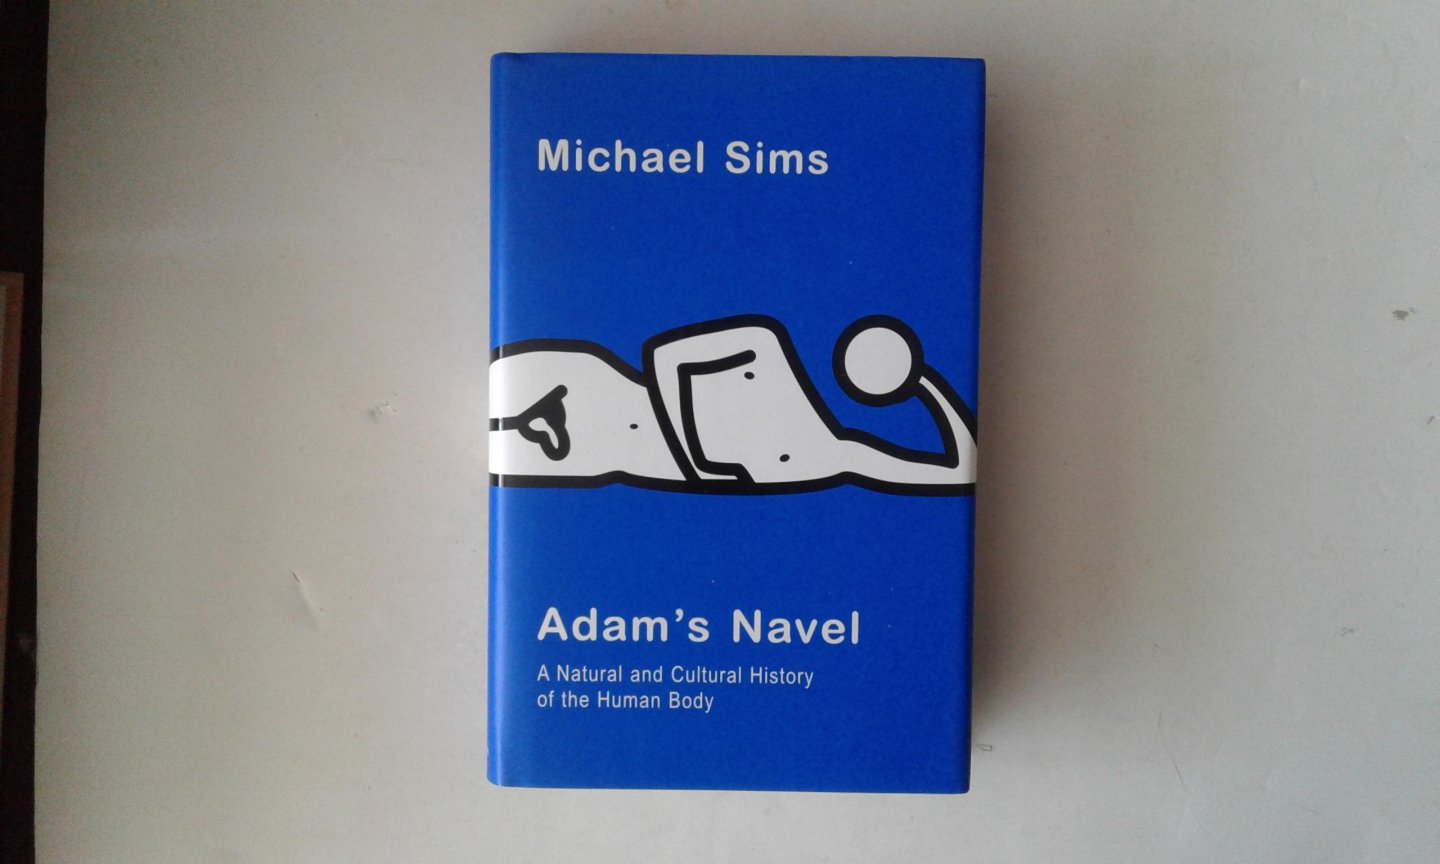 Sims, Michael - Adam's Navel ; A Natural and Cultural History of the Human Body